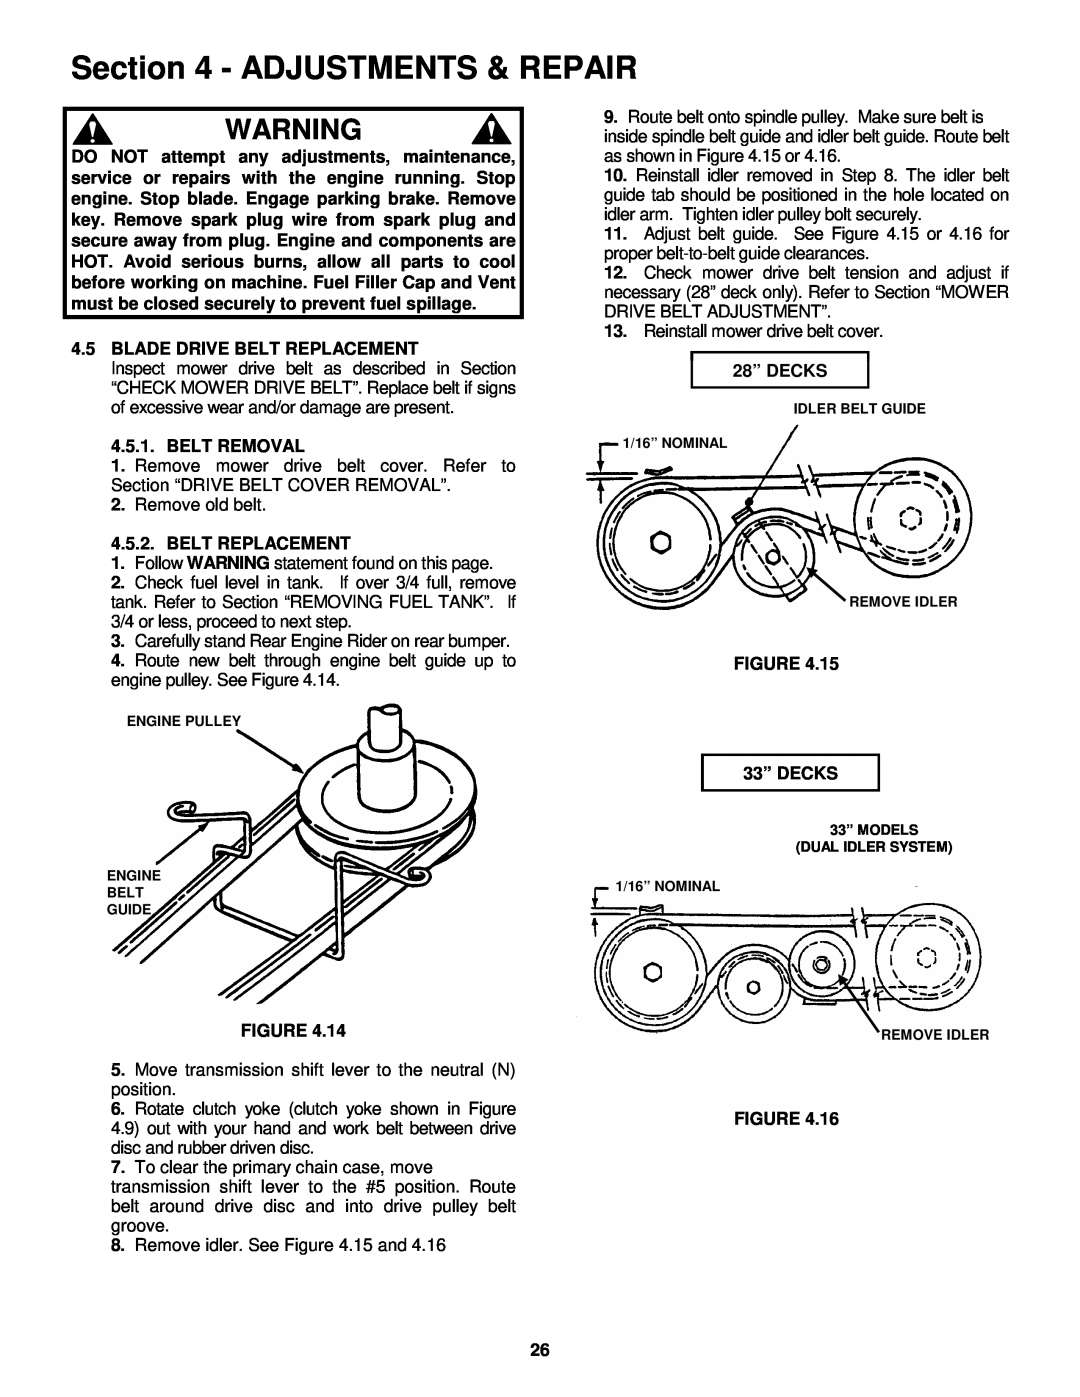 Snapper E281022BE, E281222BE, E331522KVE Adjustments & Repair, Engine Pulley Engine Belt Guide 